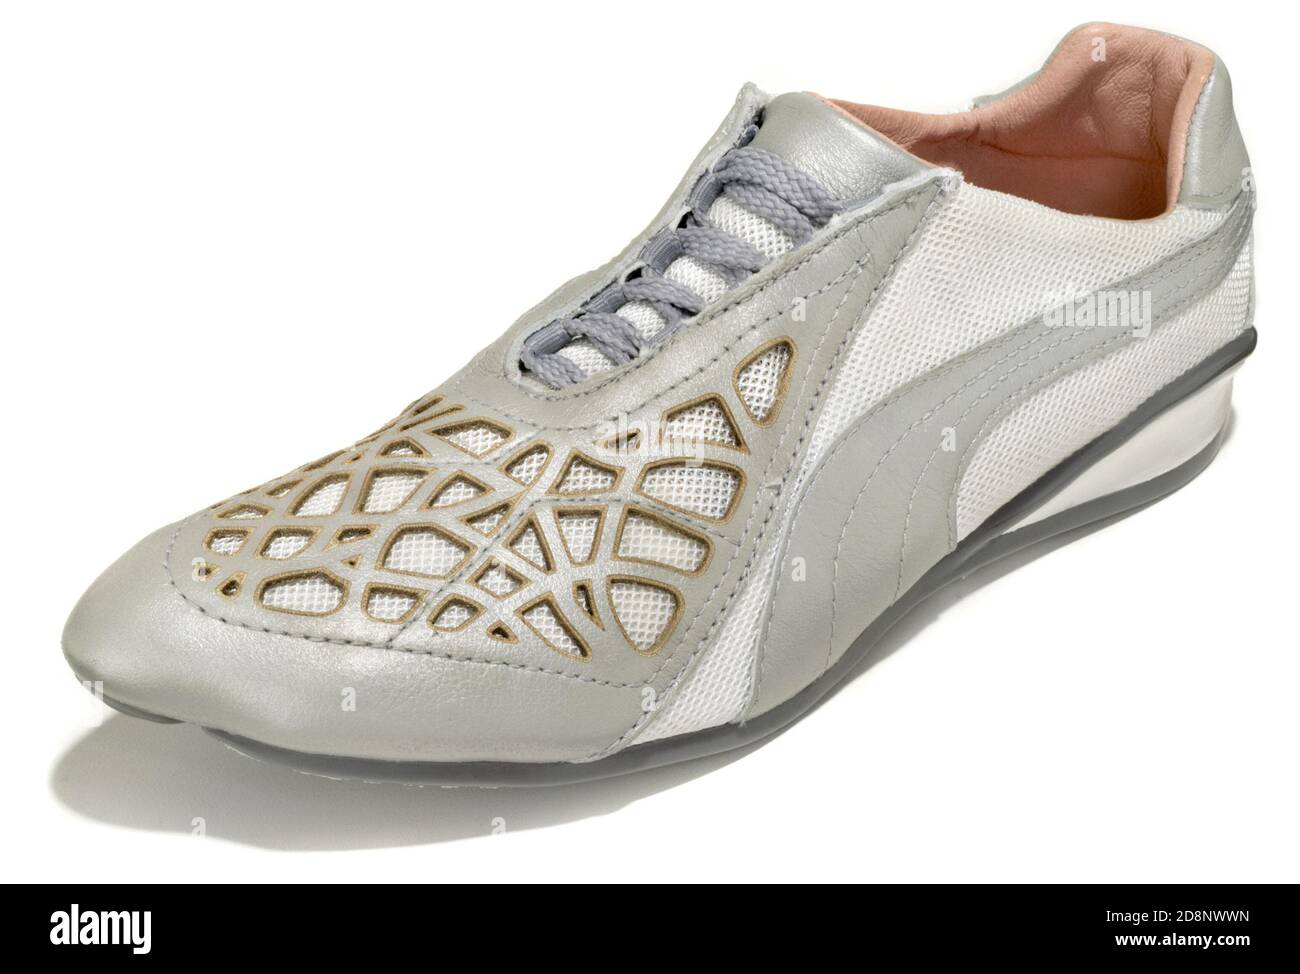 A white and silver running shoe with gold colored details designed by Puma  in collaboration with Alexander McQueen photographed on a white background  Stock Photo - Alamy